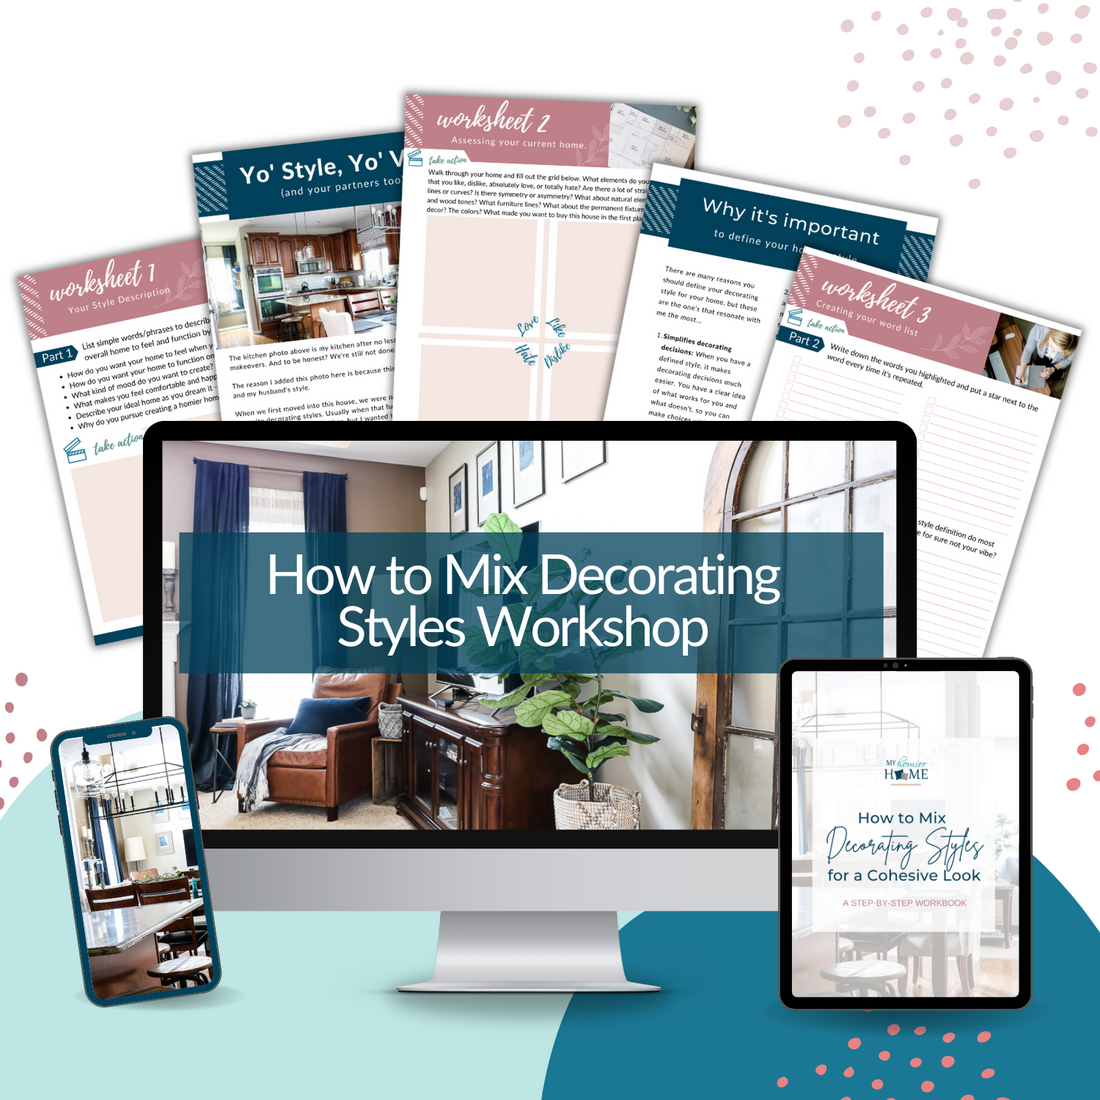 In this My Homier Home workshop, we will teach you how to achieve cohesiveness in your home decorating by blending different style preferences with our How to Mix Decorating Styles for a Cohesive Look Workshop.